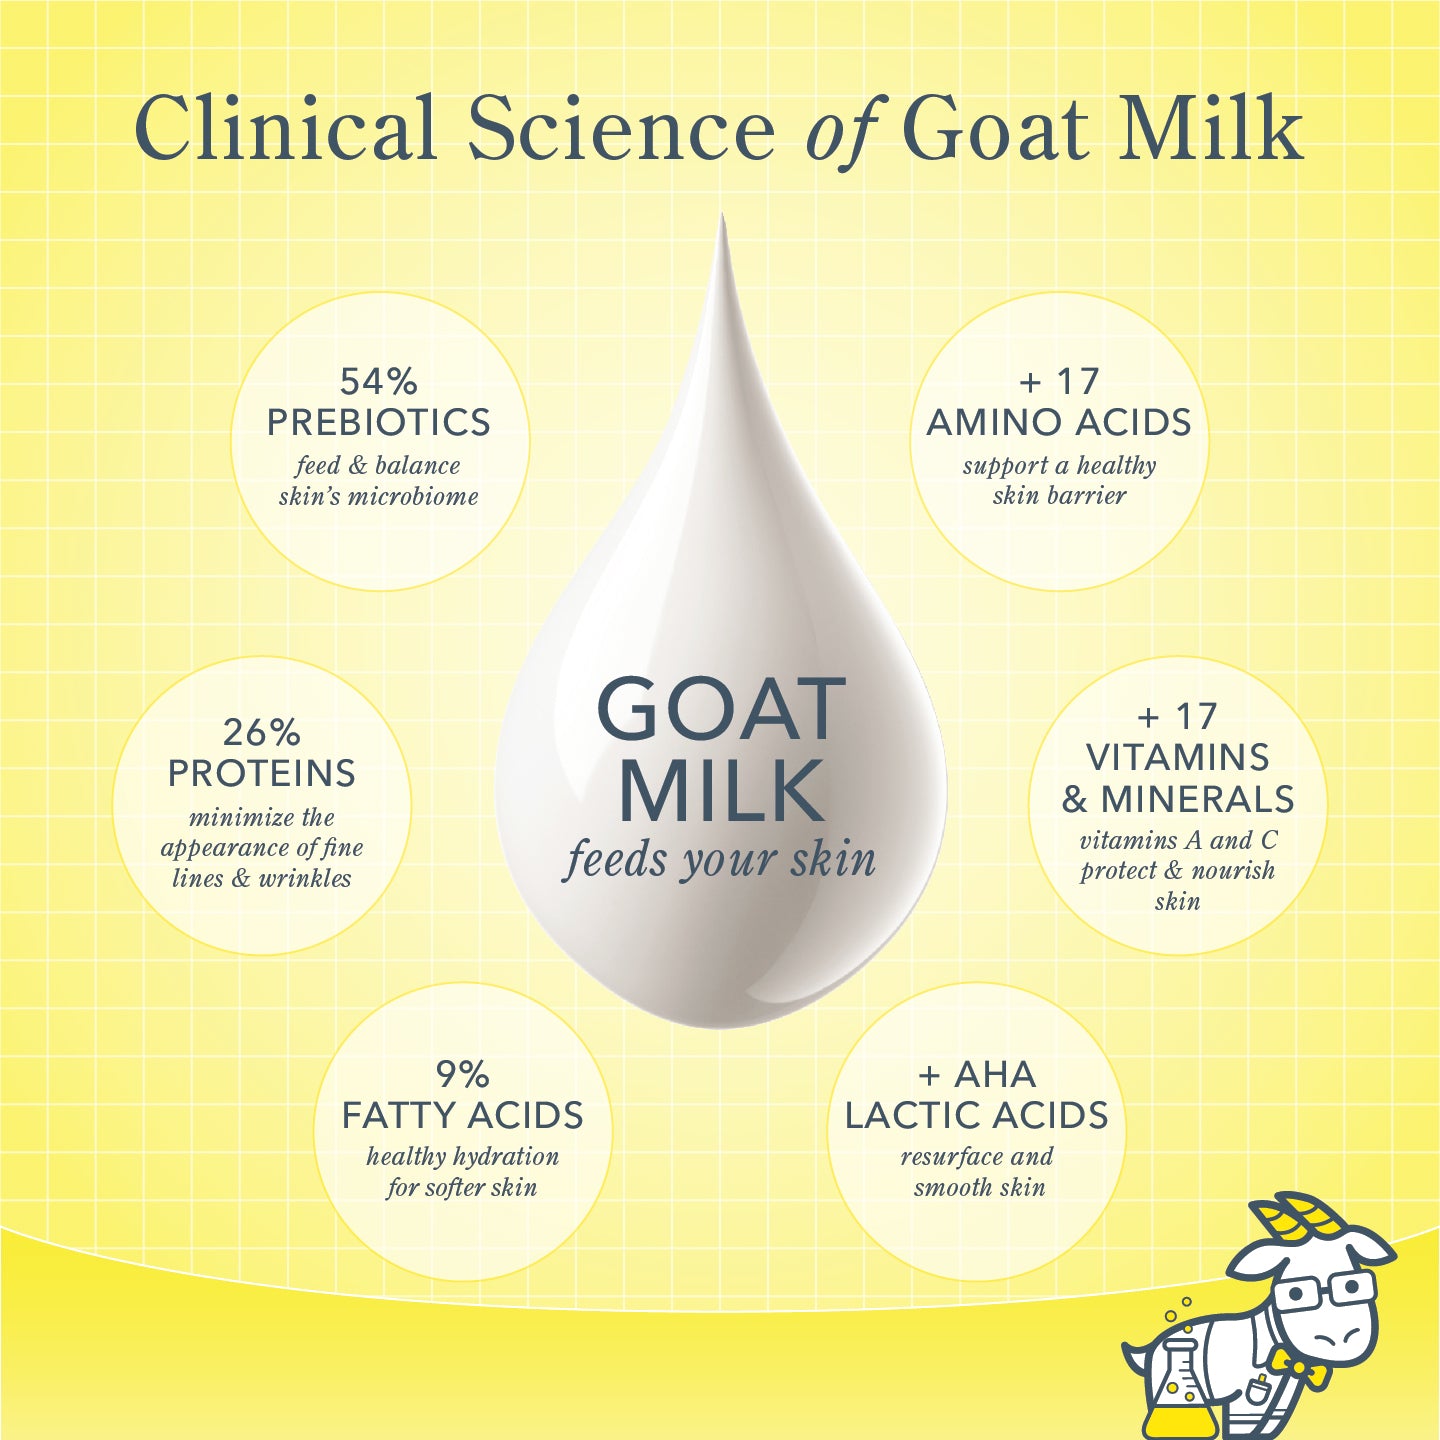 Clinical science of goat milk image which shows a milk drop with the words "goat milk feeds your skin" in the middle, and 6 circles with text surrounding the droplets to highlight the benefits of goat milk.